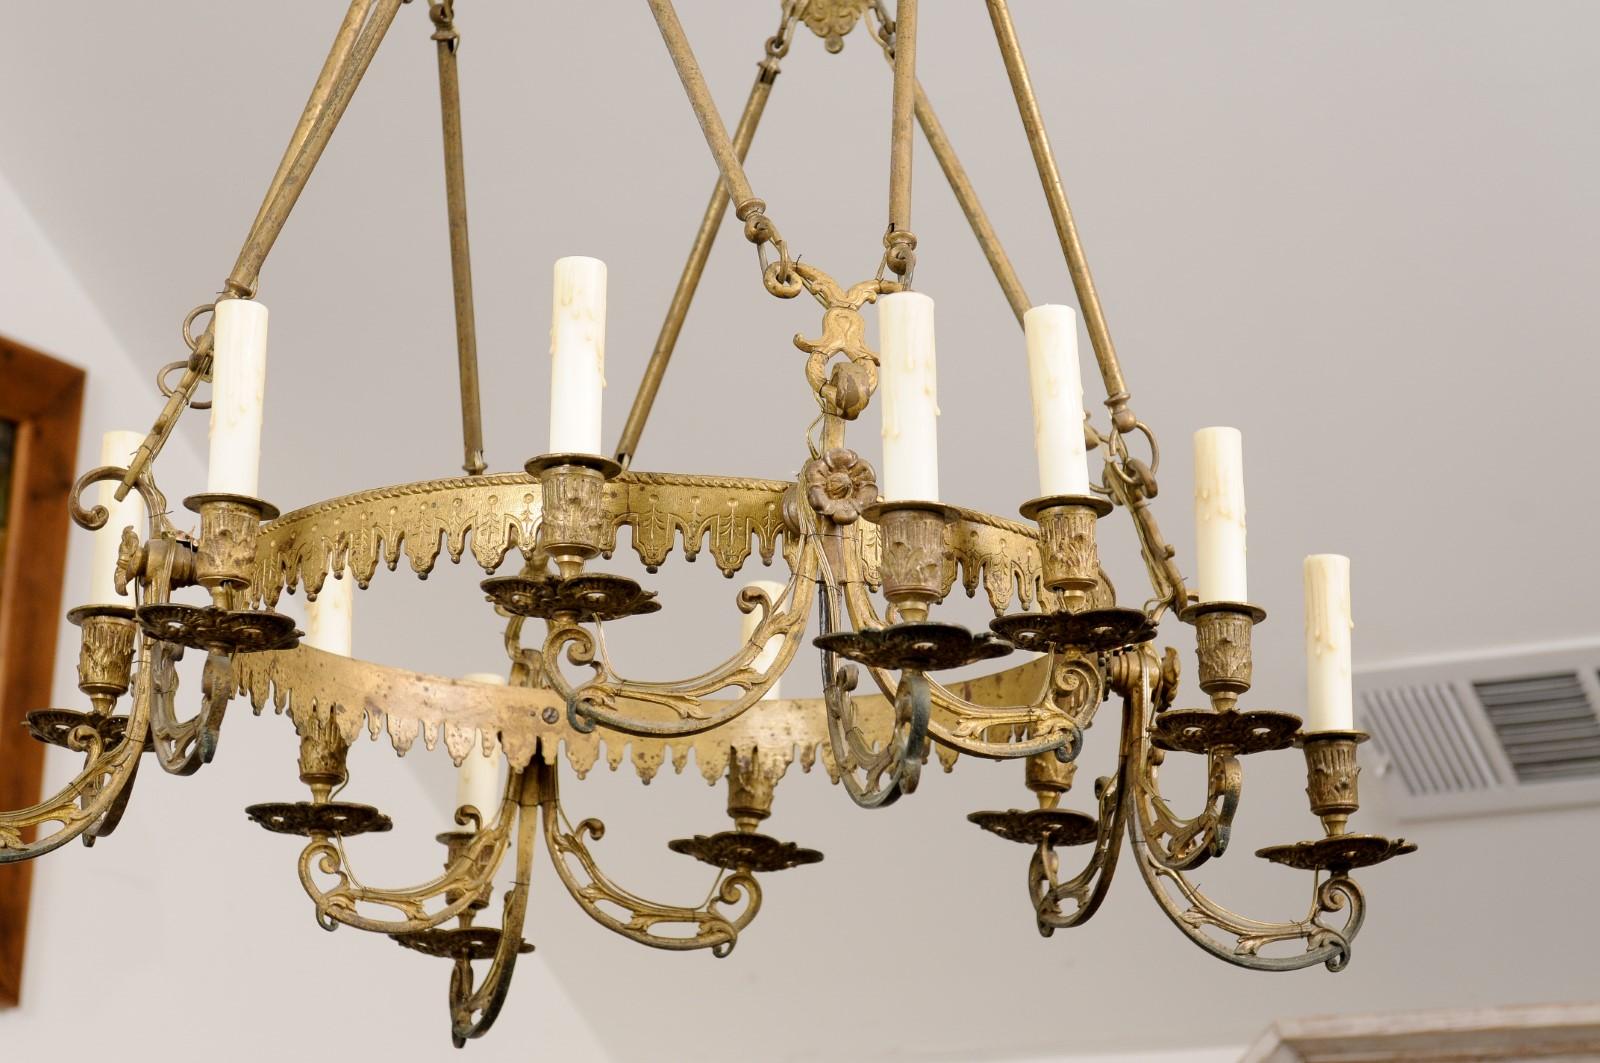 French 19th Century Bronze Twelve Light Ring Chandelier with Scrolling Arms For Sale 8